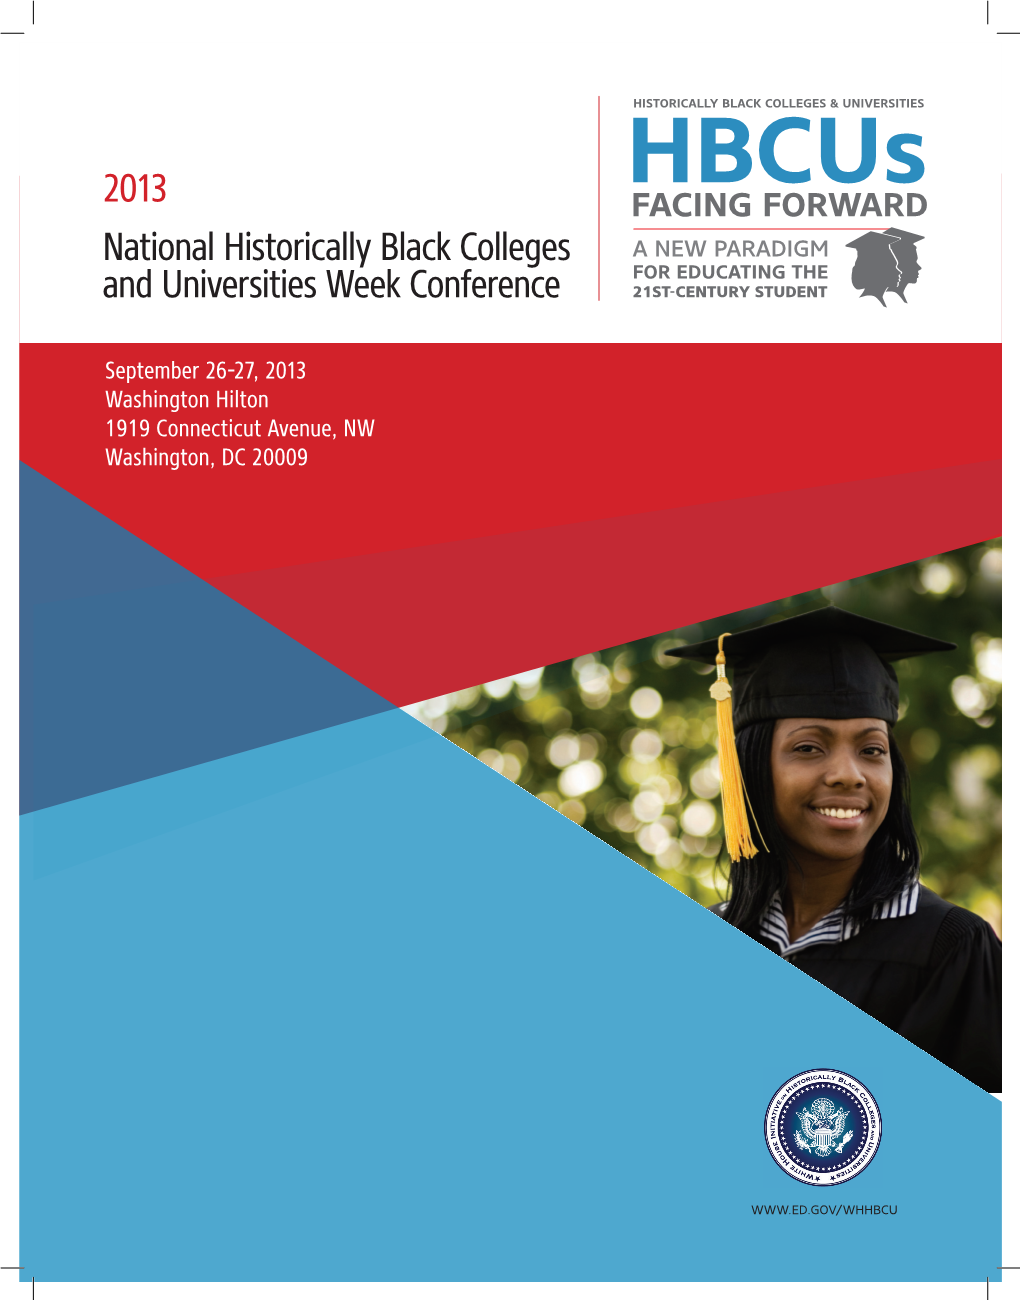 2013 National Historically Black Colleges and Universities Week Conference